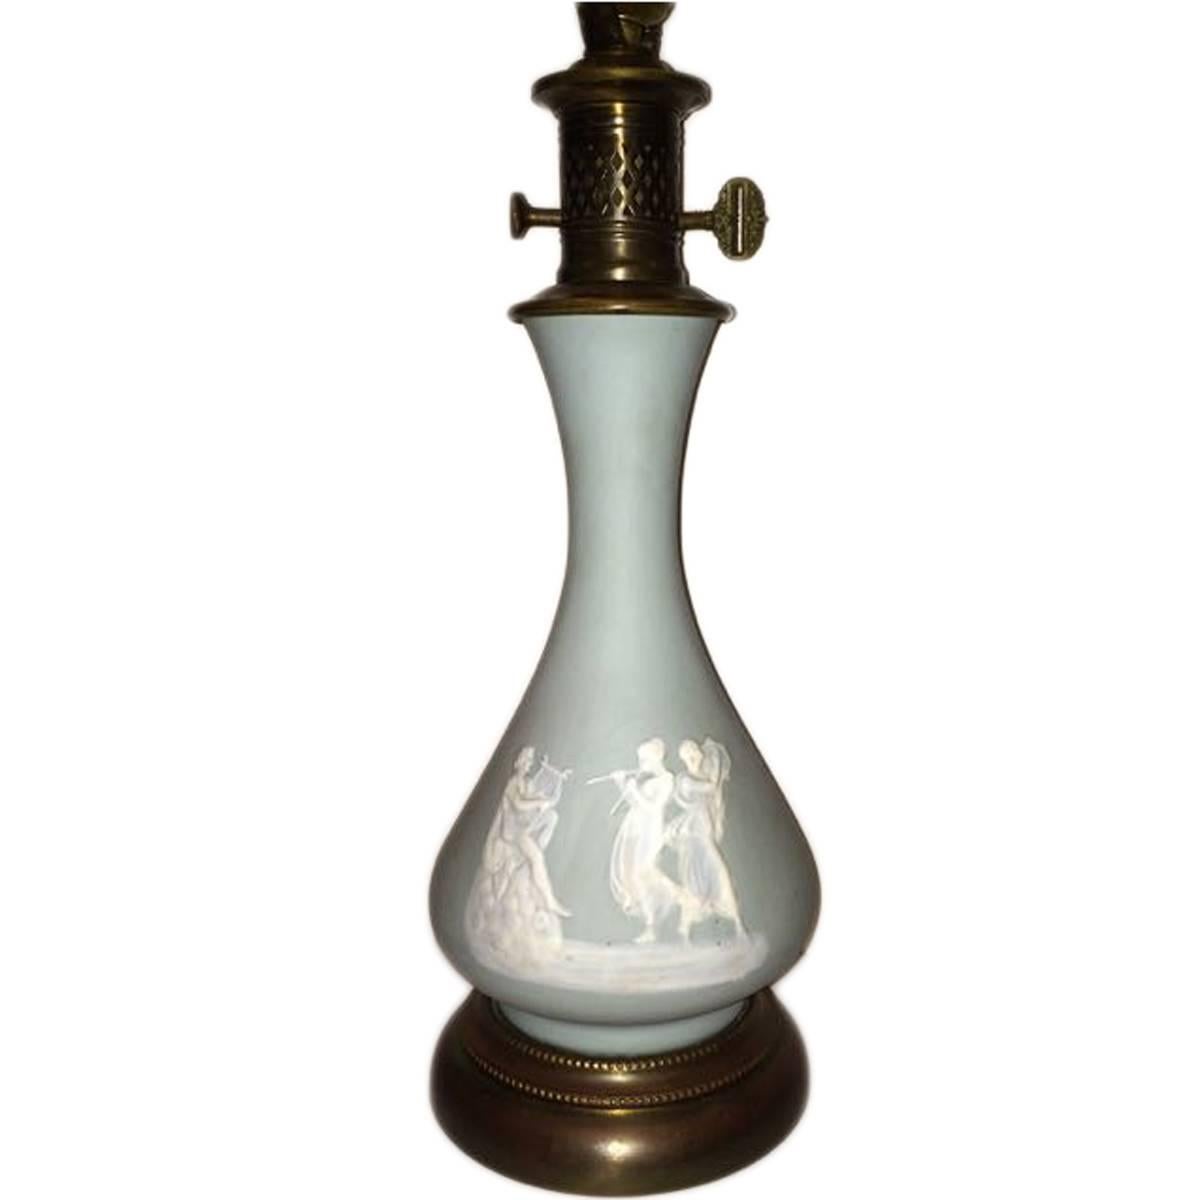 A circa 1920 French porcelain table lamp with pate sur pate neoclassic decoration.

Measurements:
Diameter: 6